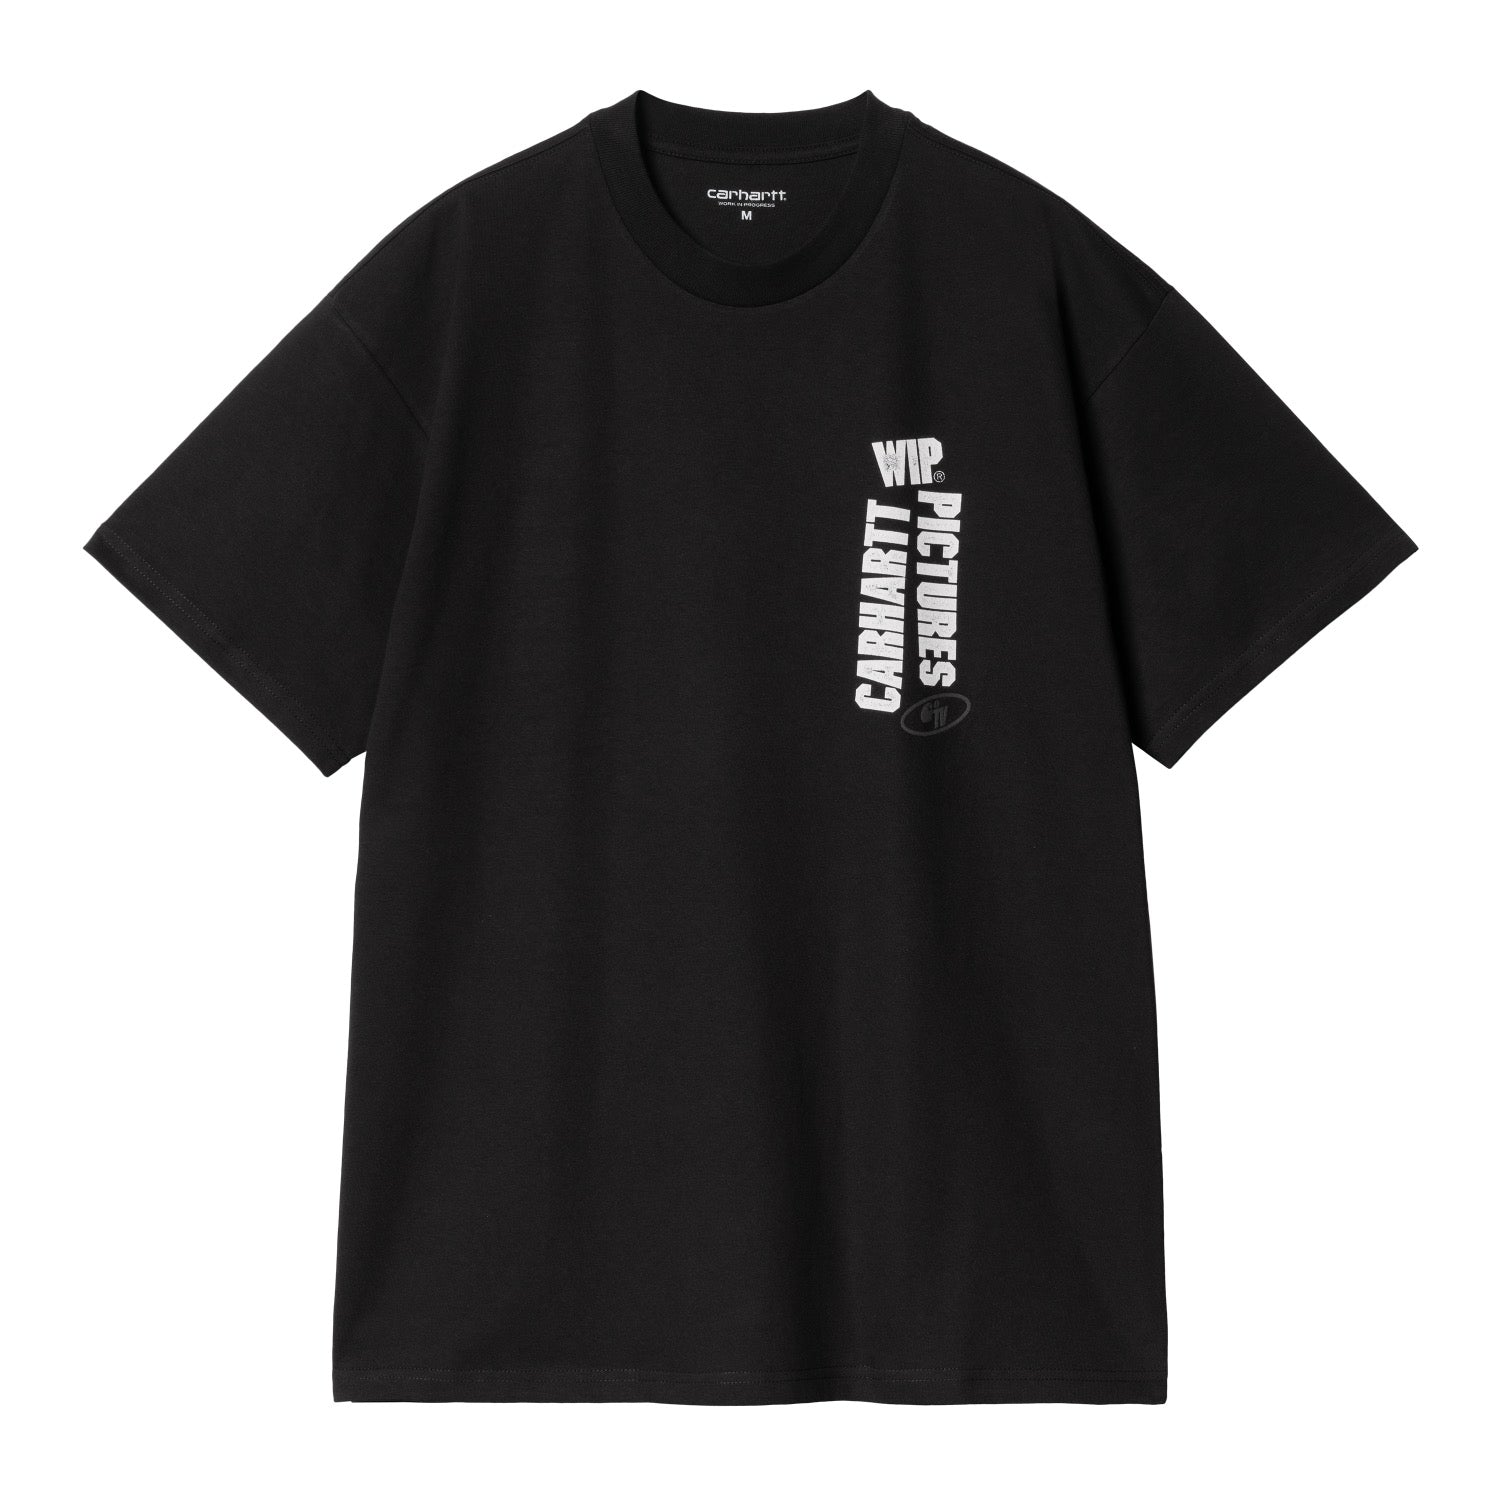 S/S WIP PICTURES T-SHIRT - Black